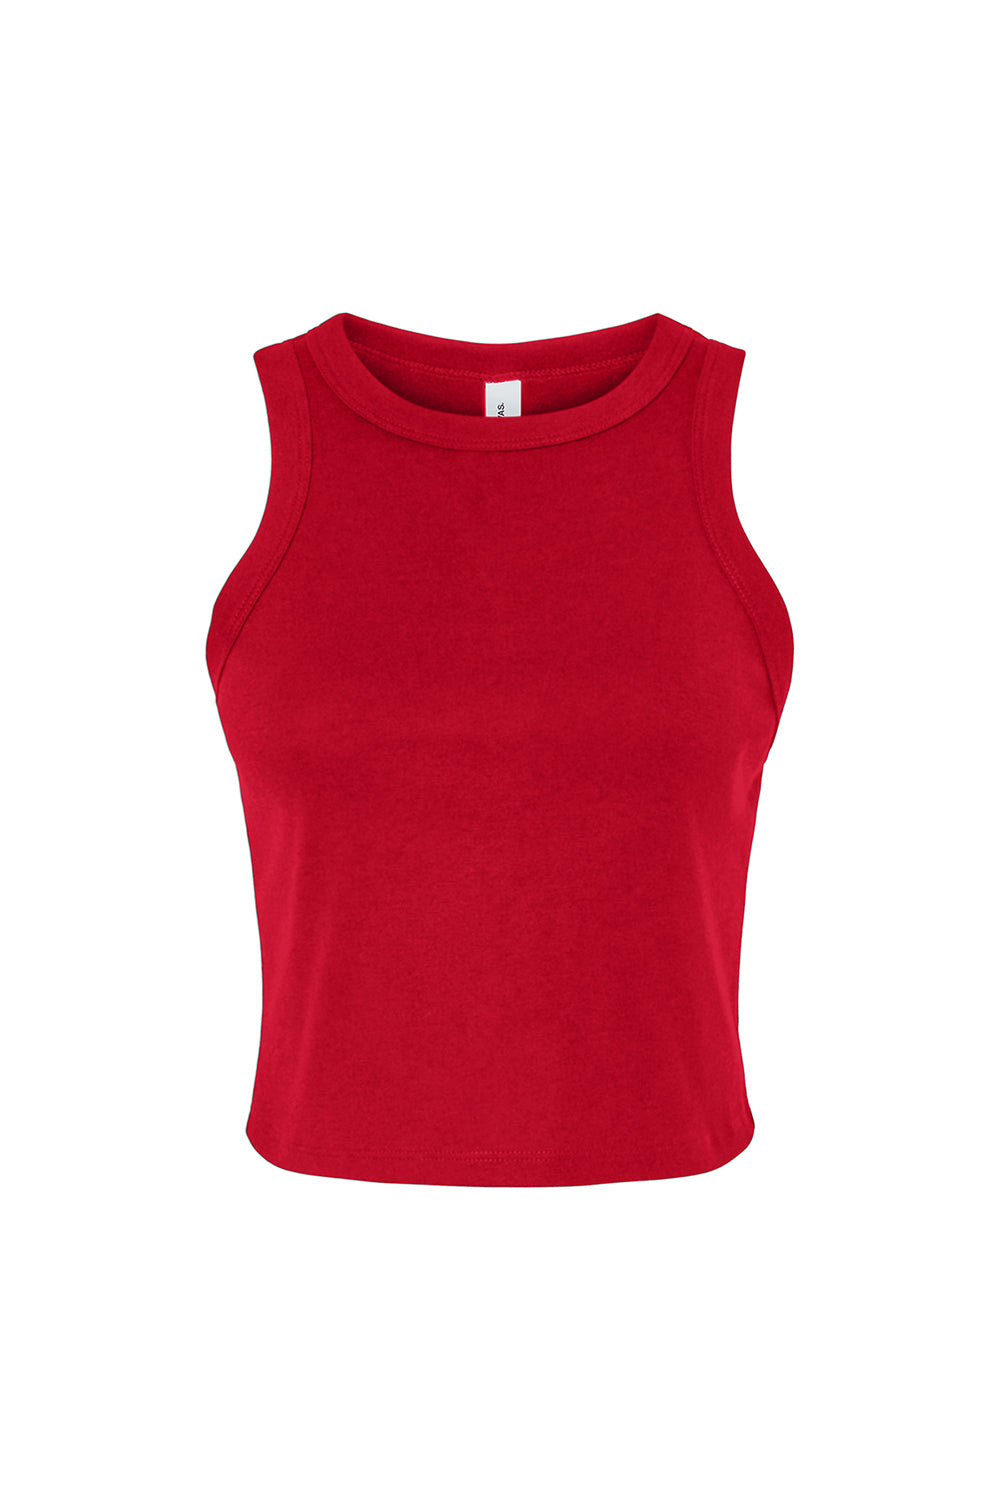 Bella + Canvas 1019 Womens Micro Ribbed Racerback Tank Top Red Flat Front